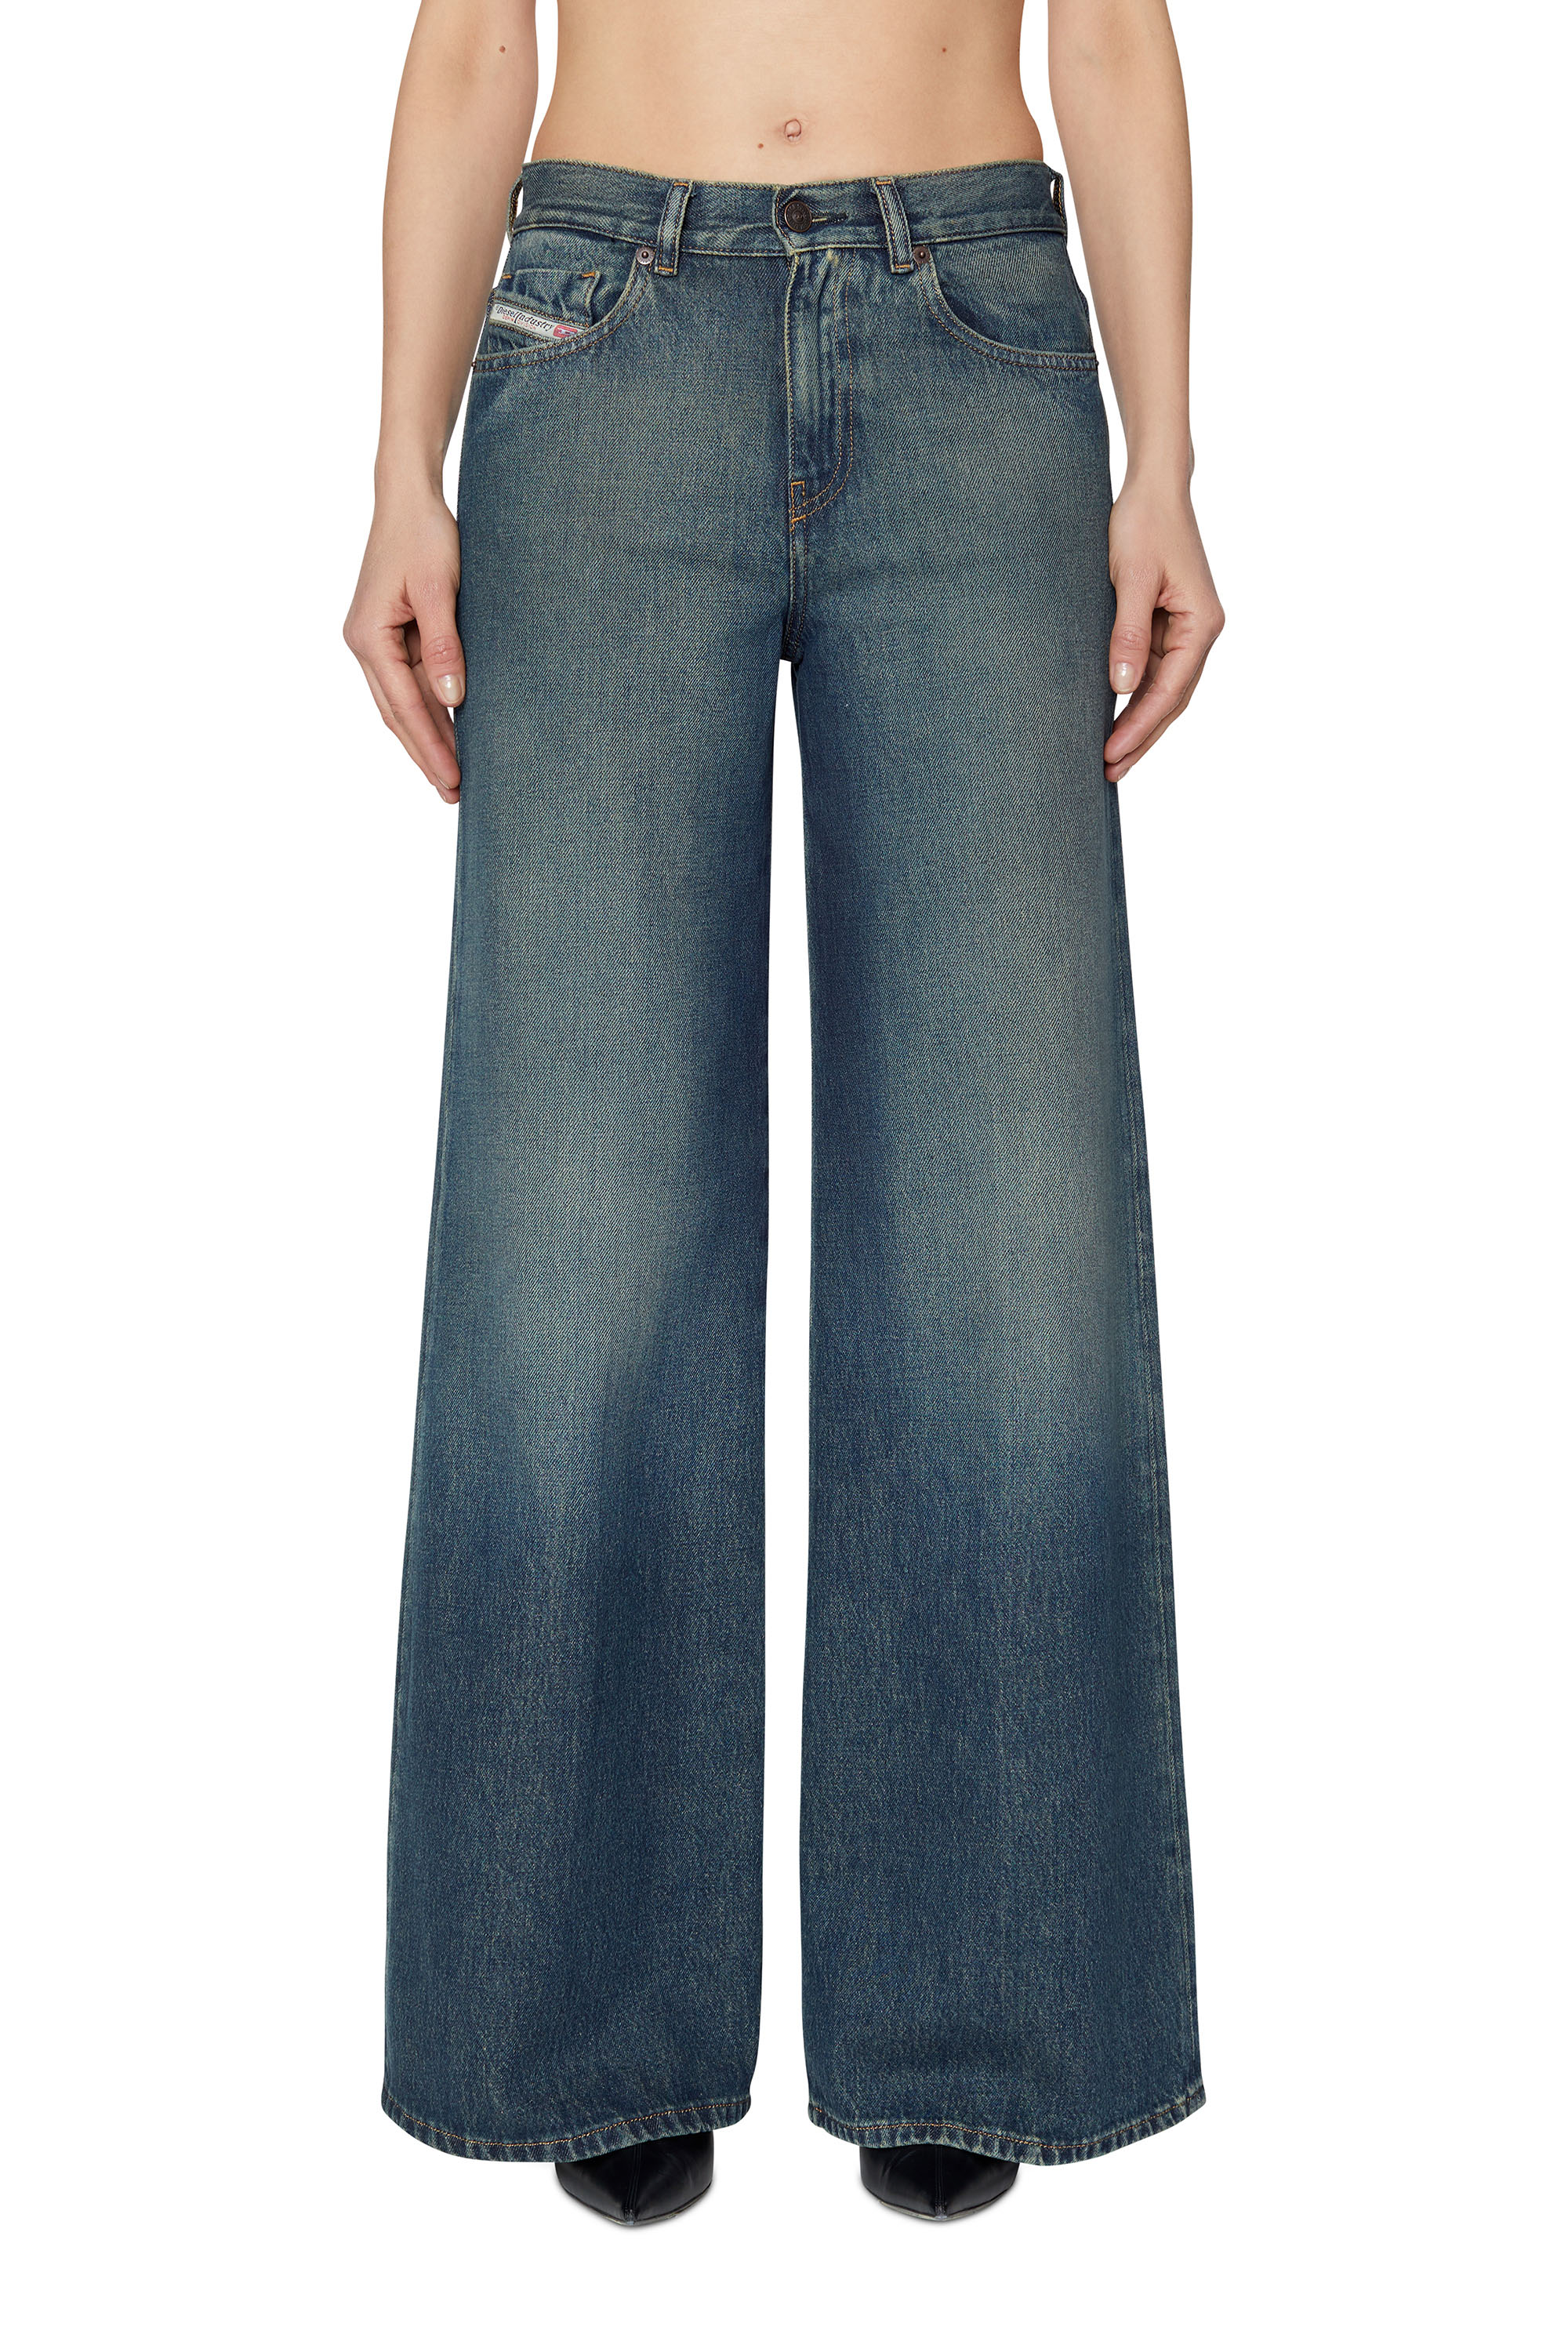 1978 09C04 Bootcut and Flare Jeans,  - Jeans